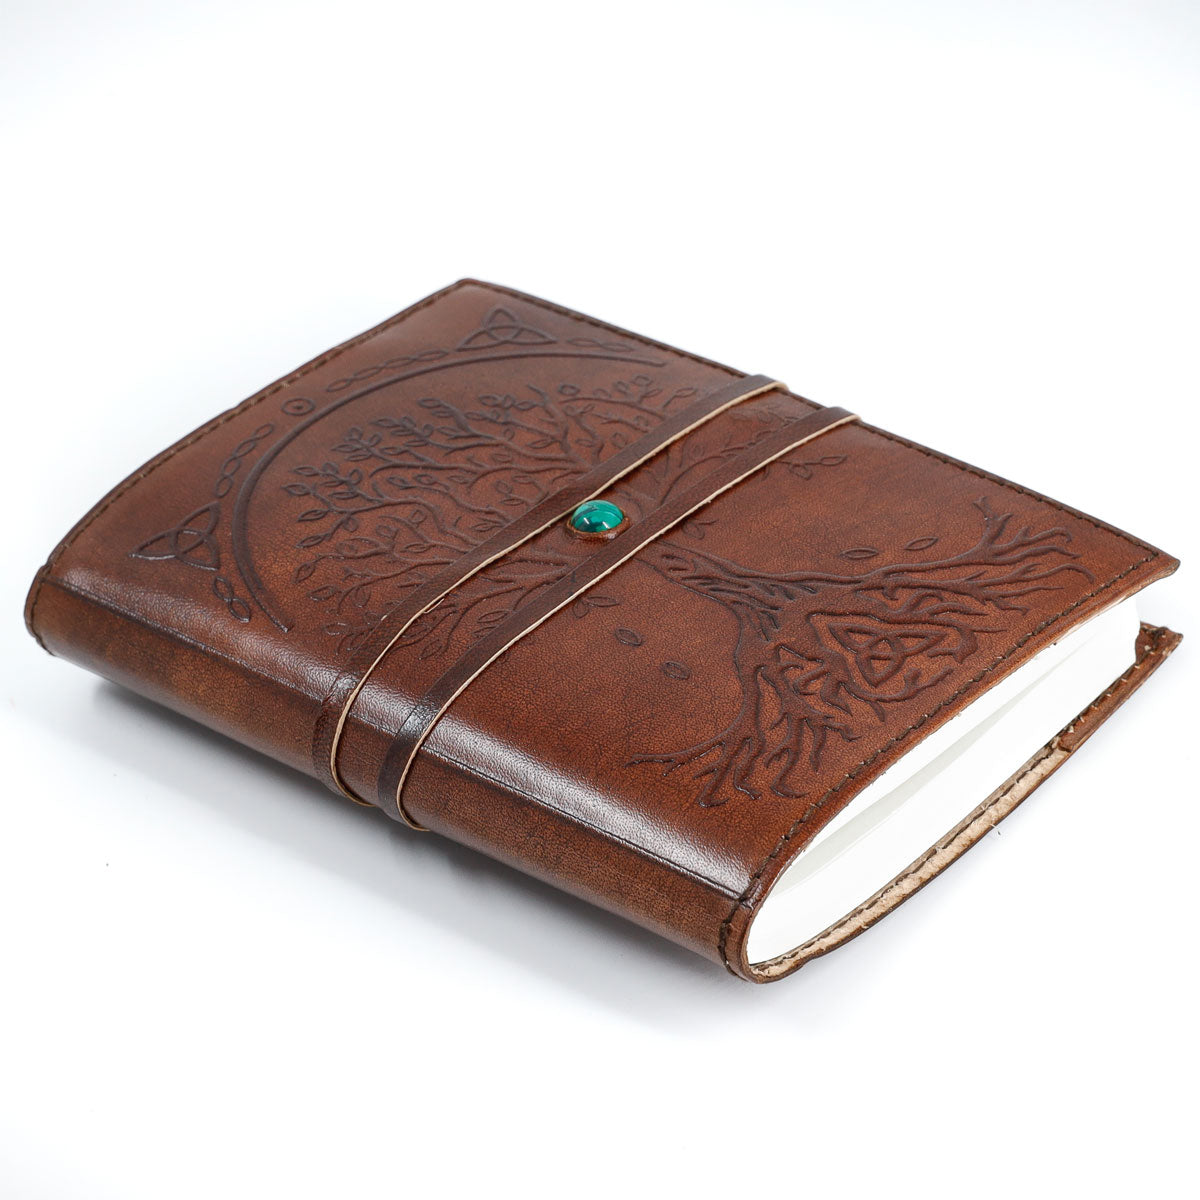 Refillable Leather Journal Lined Notebook - Journals for Women with Embossed Heart Shape Handmade Leather Notebook with Pen Holder Includes Premium